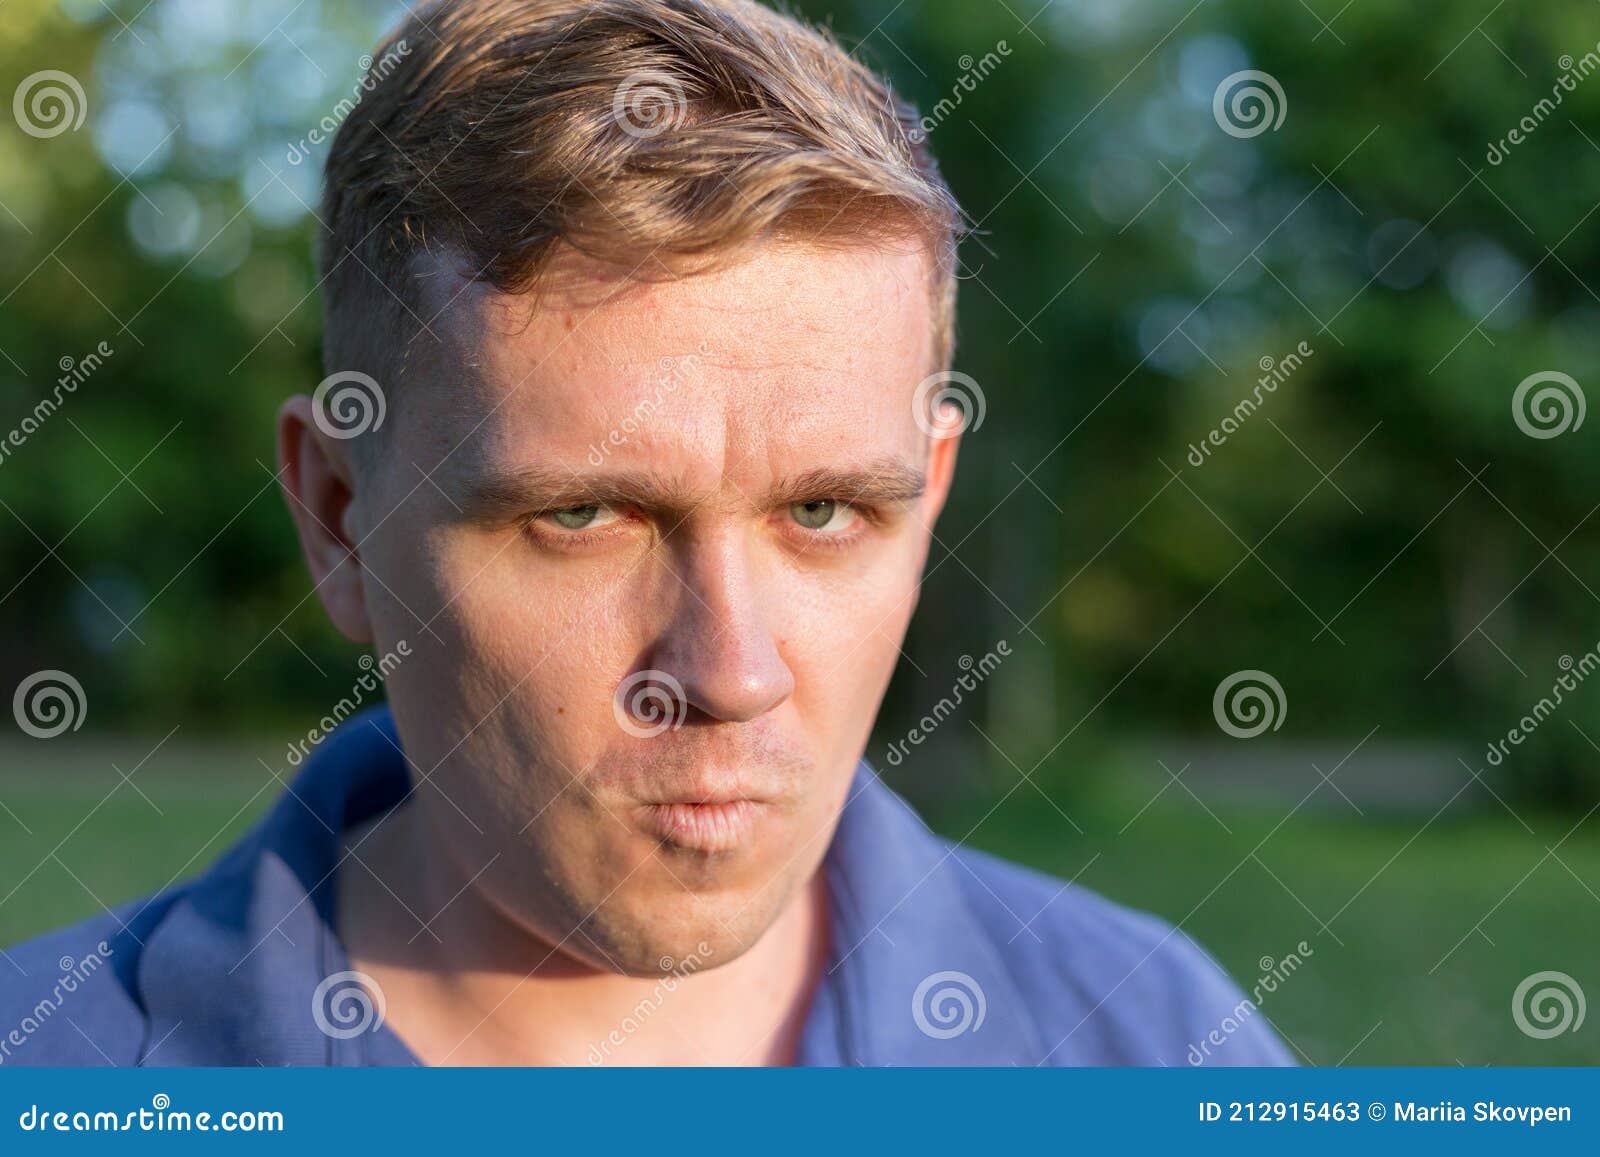 man with a scornful disdainful disrespectful look. portrait of a young guy on nature background, feelings and people